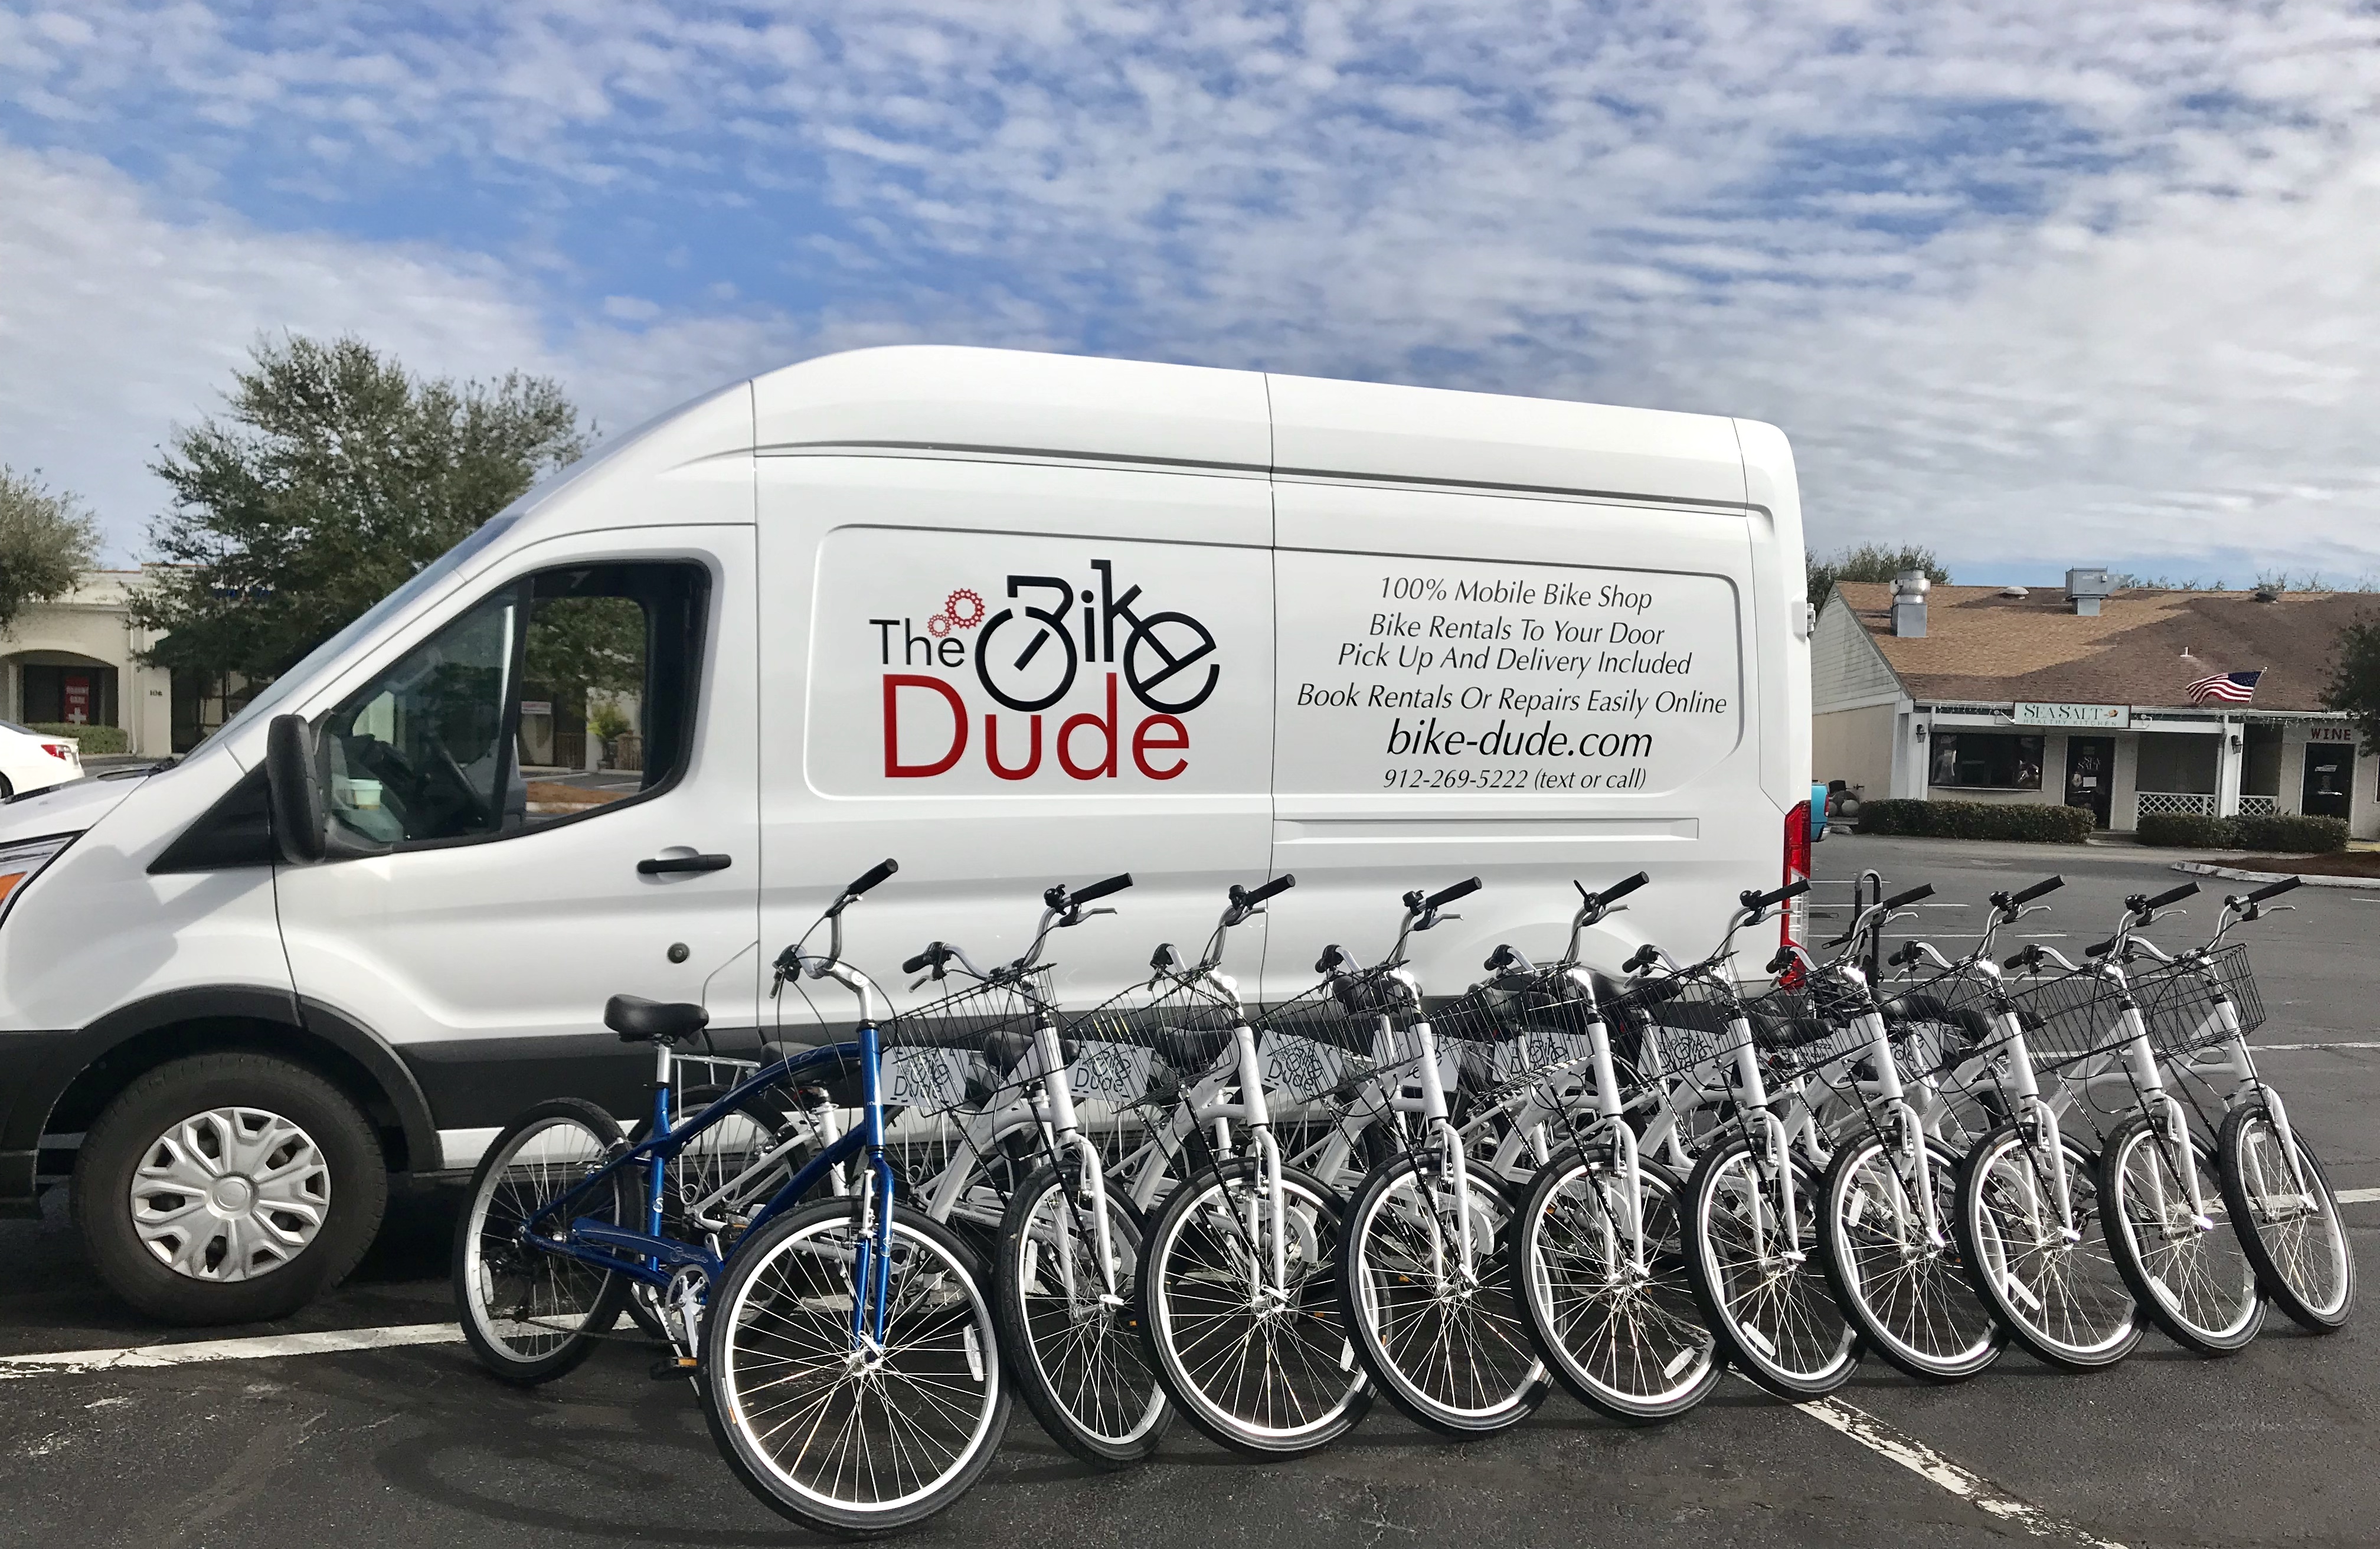 renting bicycles near me